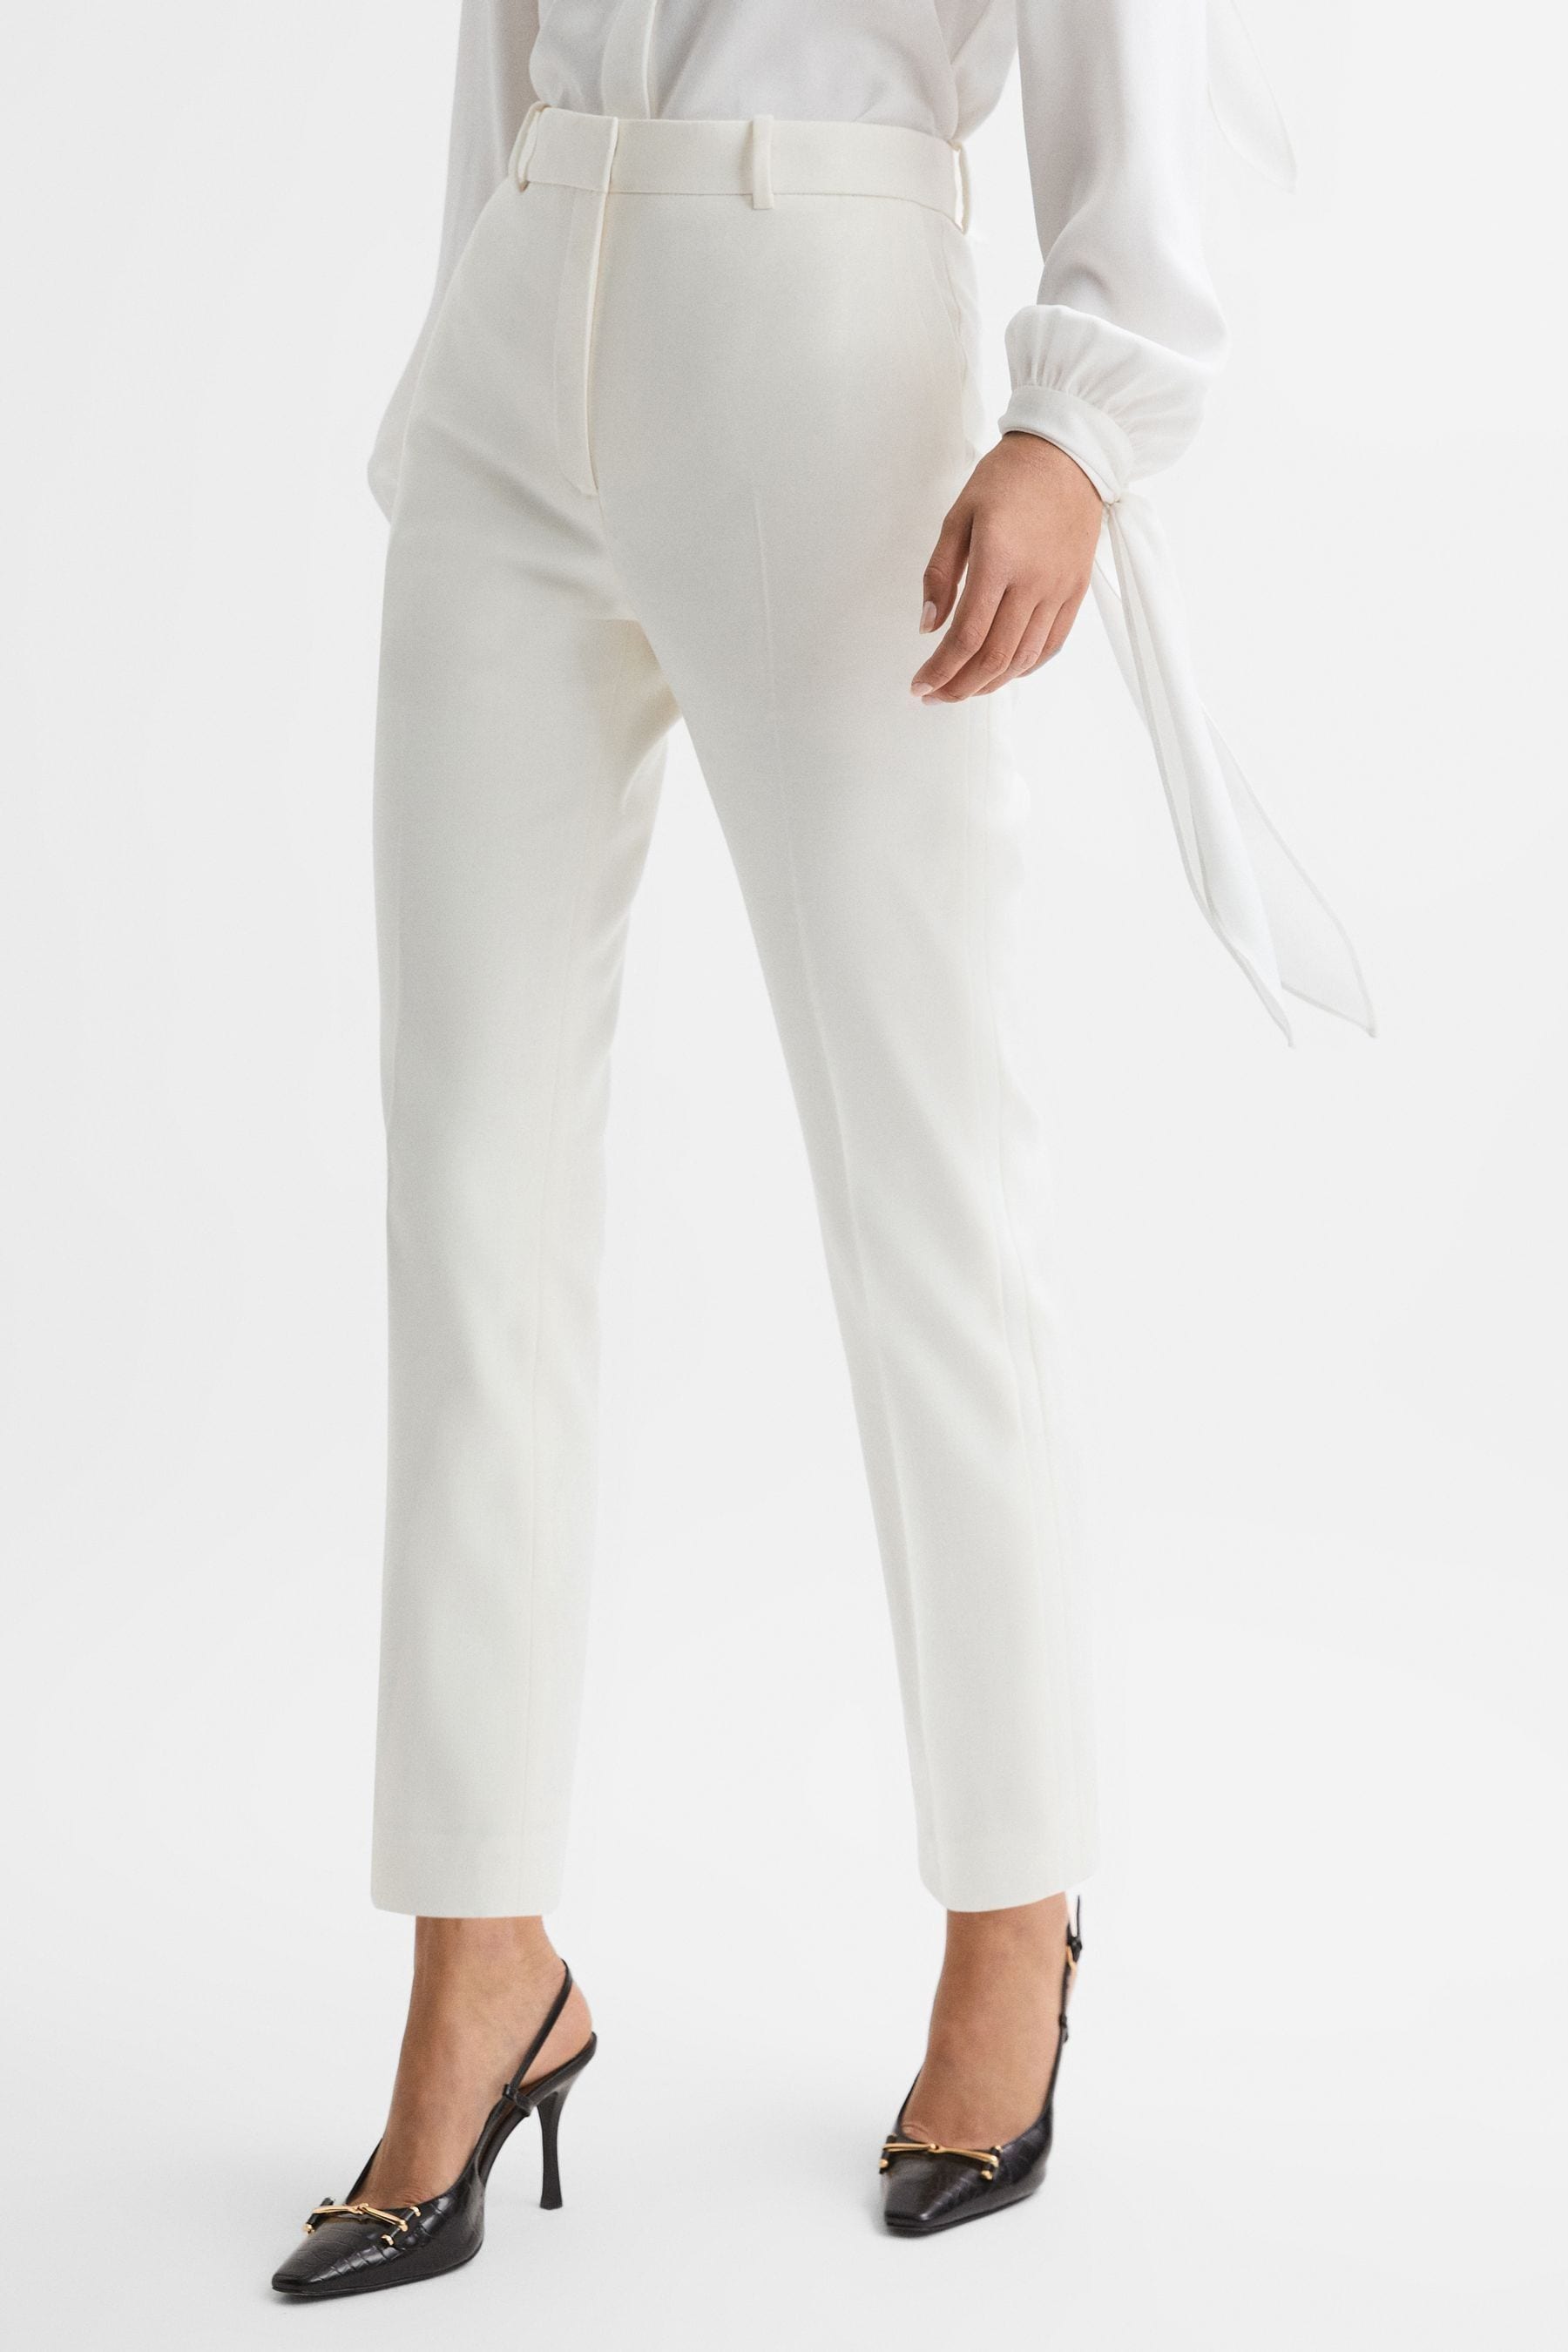 Reiss Mila - Off White Slim Fit Wool Blend Suit Trousers, Us 12